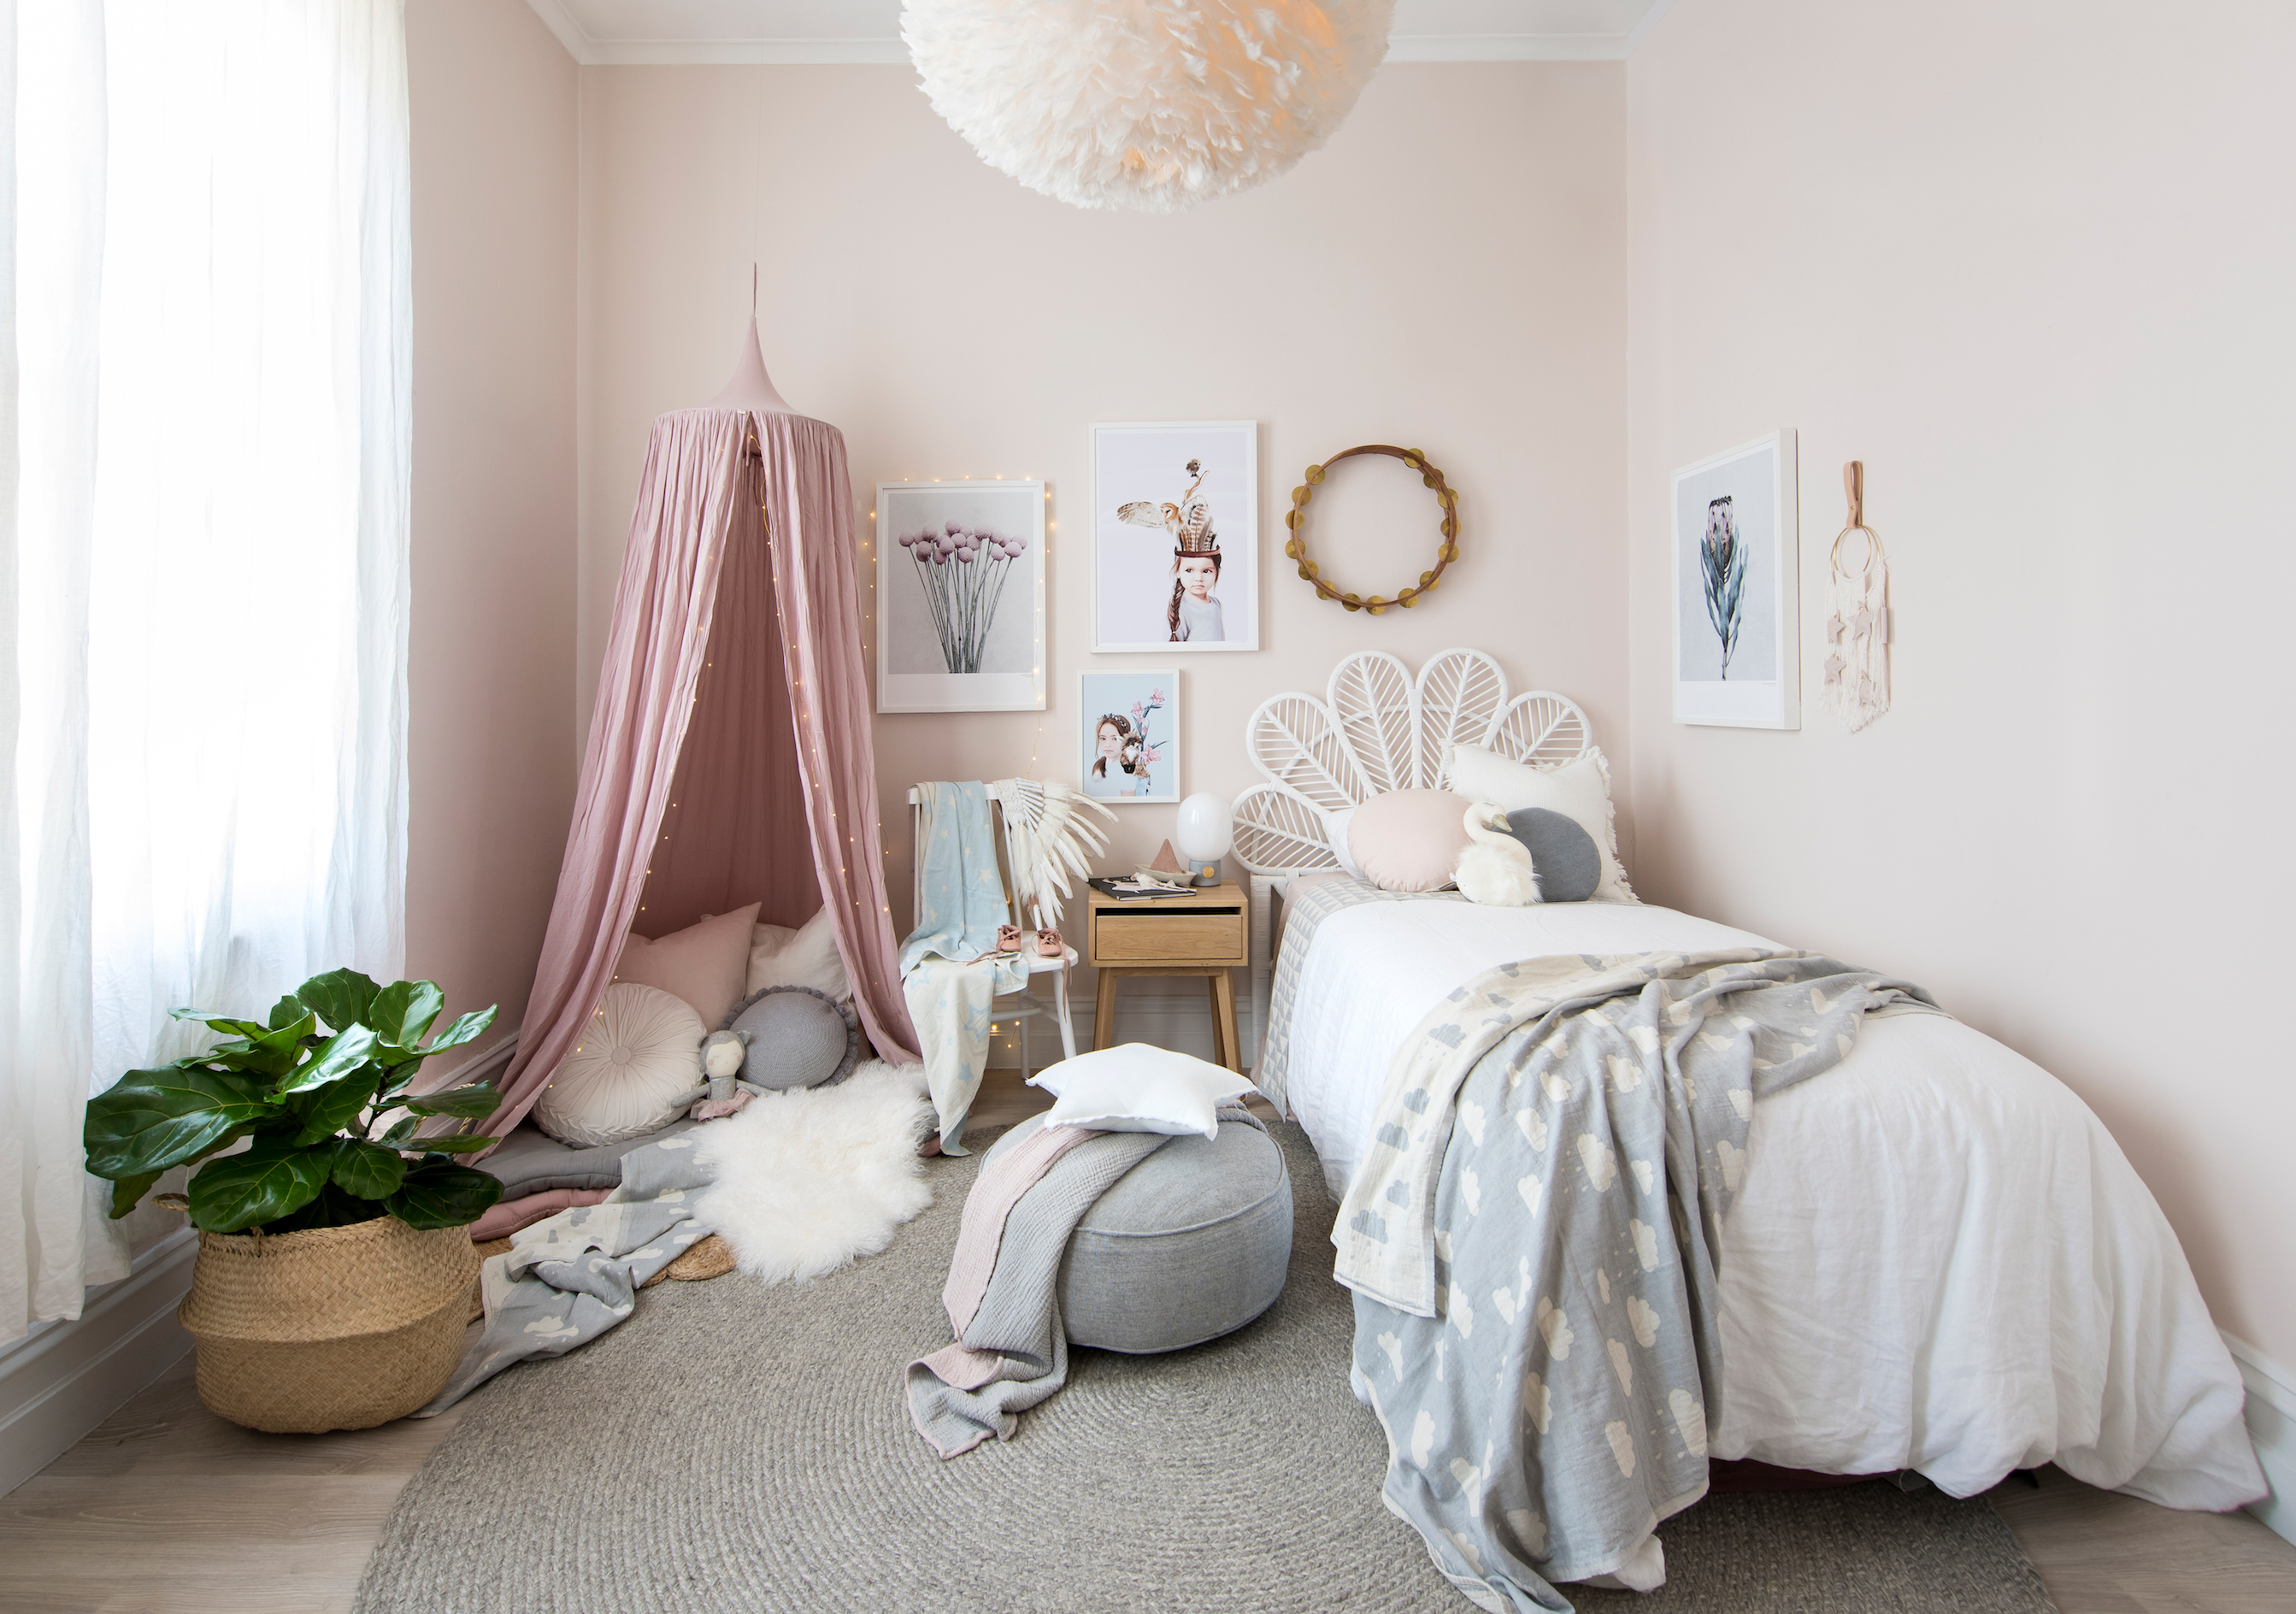 15 girl's bedroom ideas for a chic space they will love | Livingetc